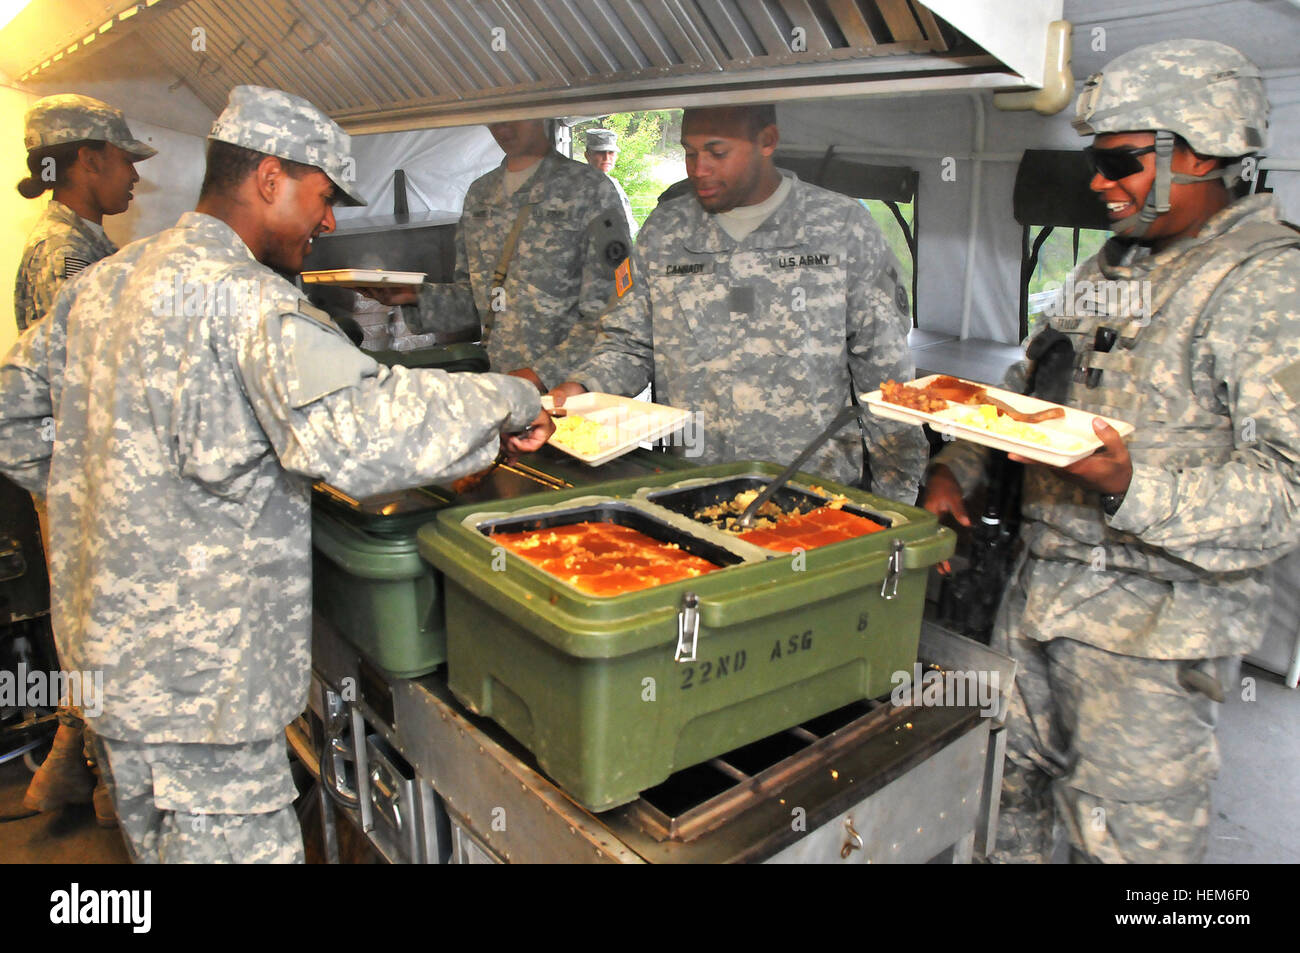 U.S. Army soldiers (left) from Field Feeding Team 4, Regimental Support  Squadron (RSS), 2nd Cavalry Regiment (2CR) Rose Barracks, Germany serve  breakfast to U.S. Army soldiers assigned to “Mad Dog “ Troop,